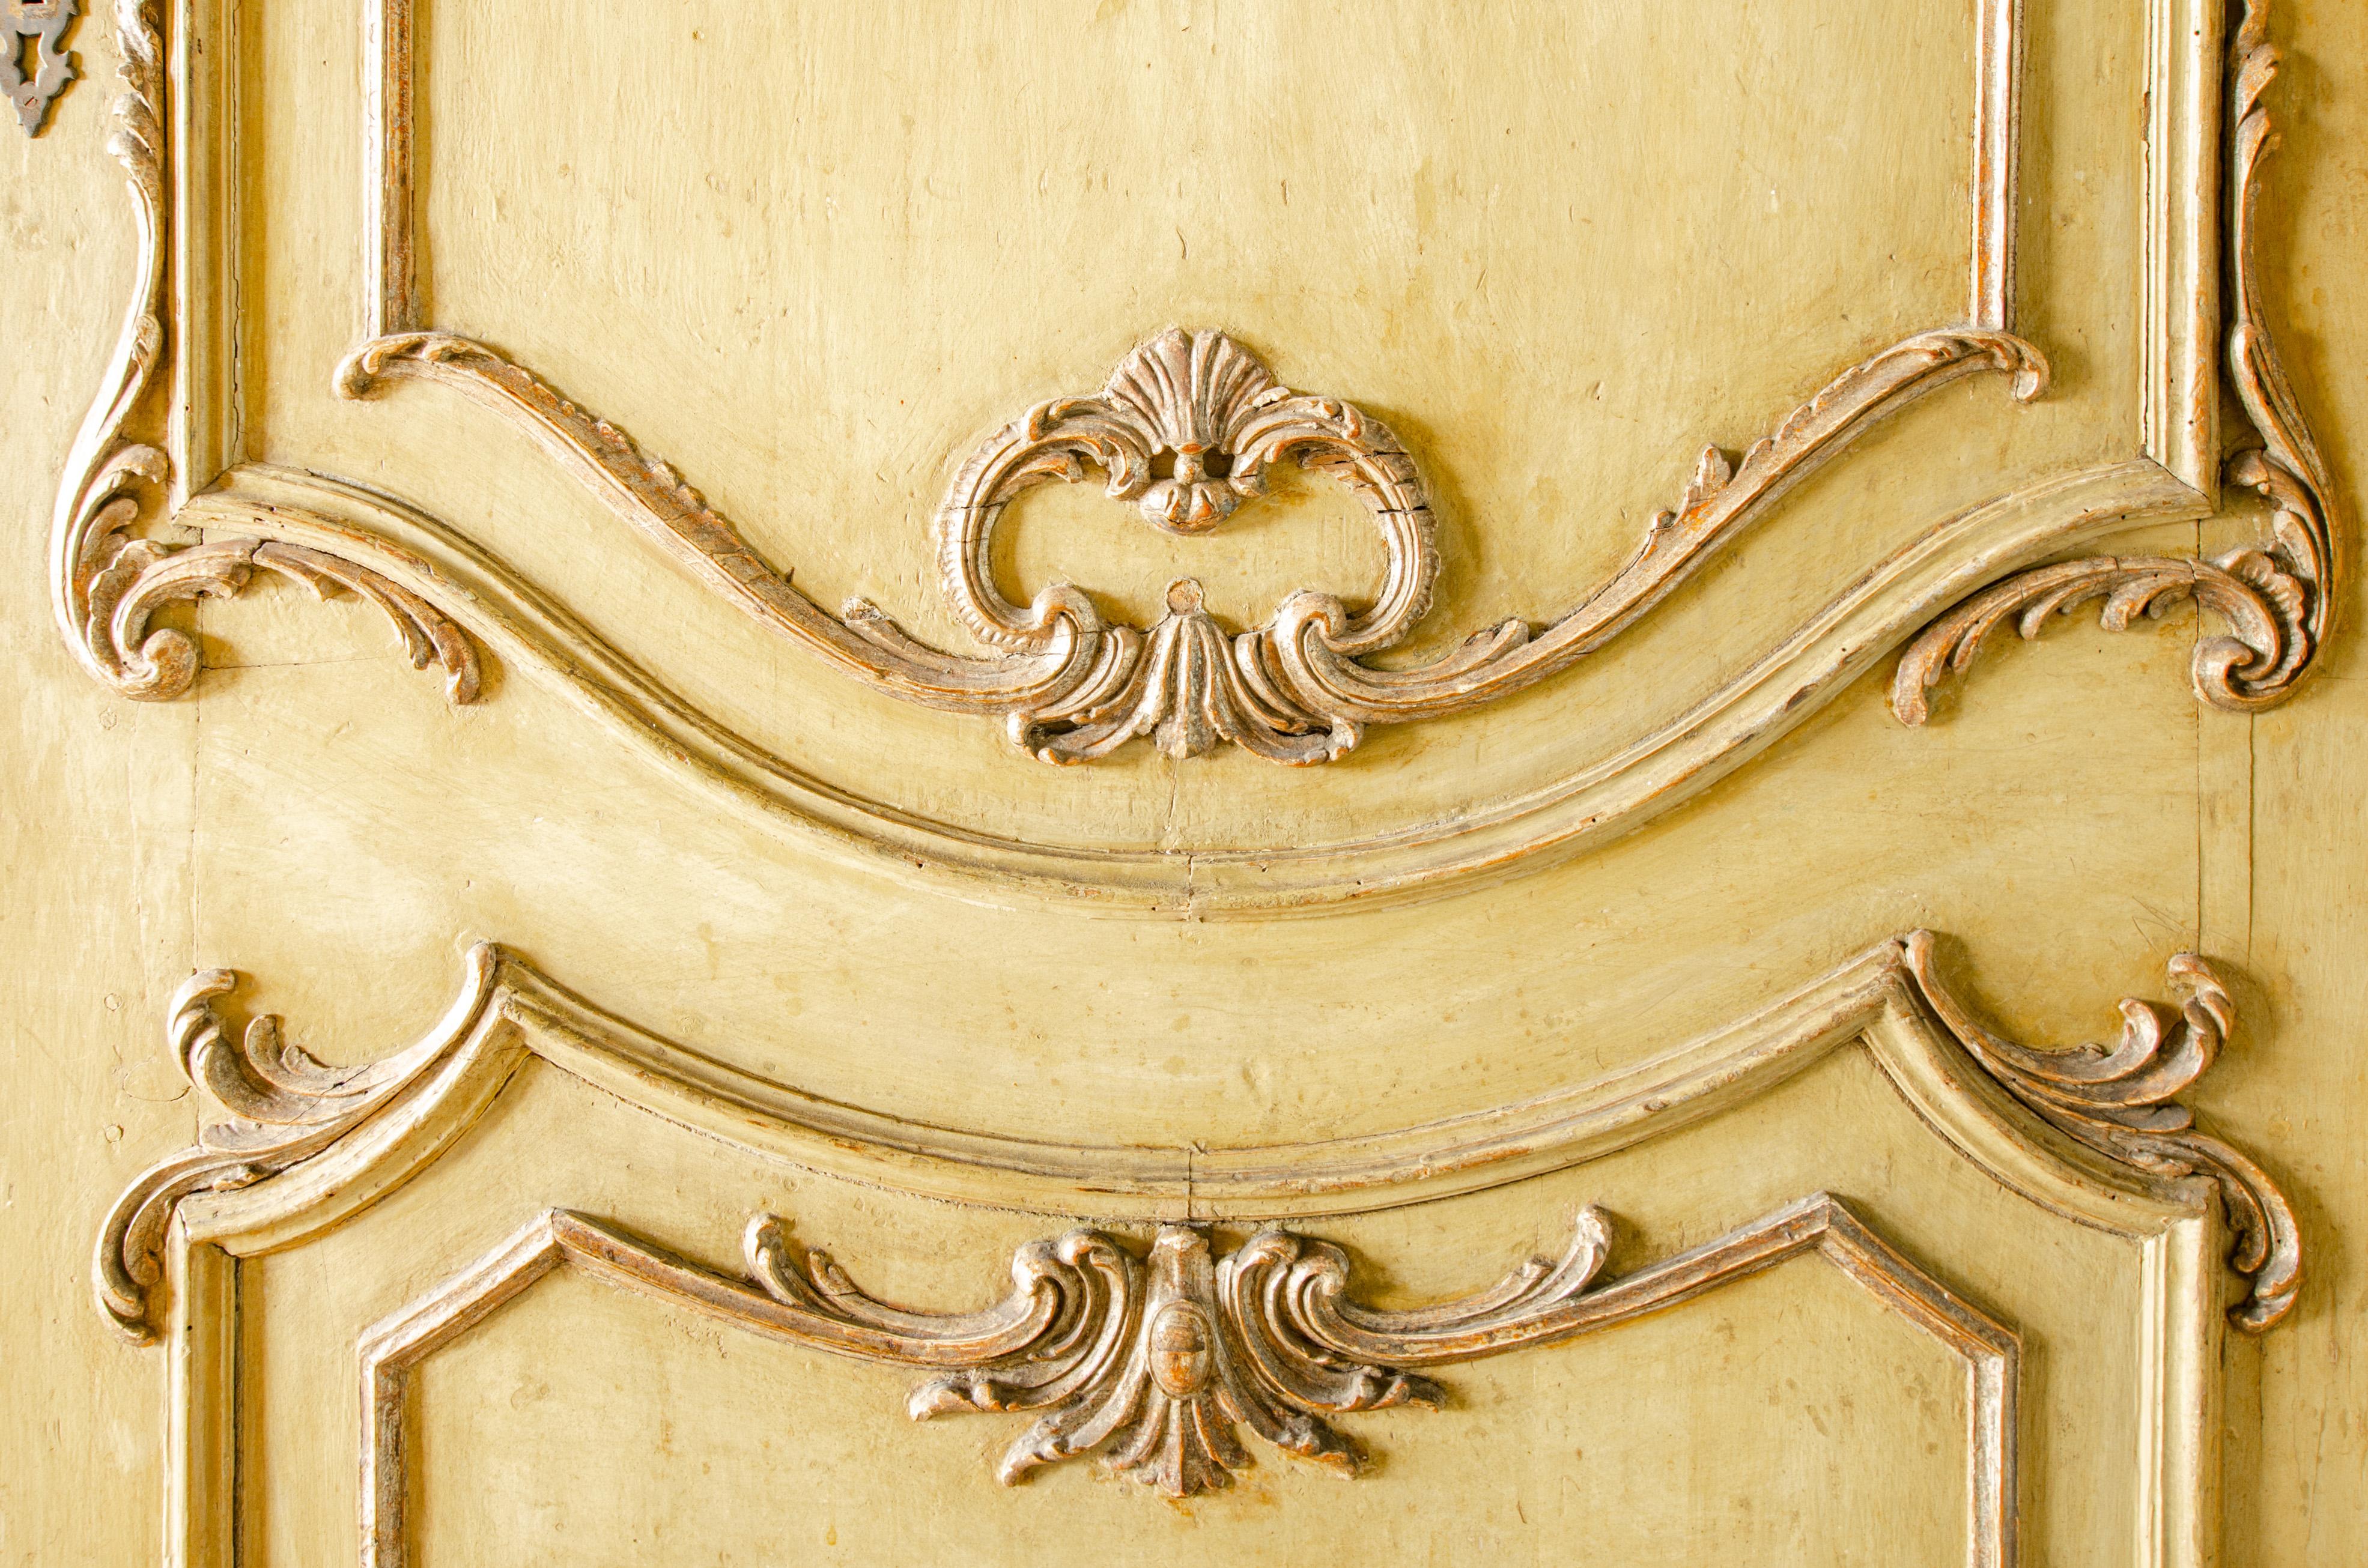 2 Antiques Baroque Doors Lacquered Yellow and Gilded, Mirror Updoor, 1700 Italy For Sale 6